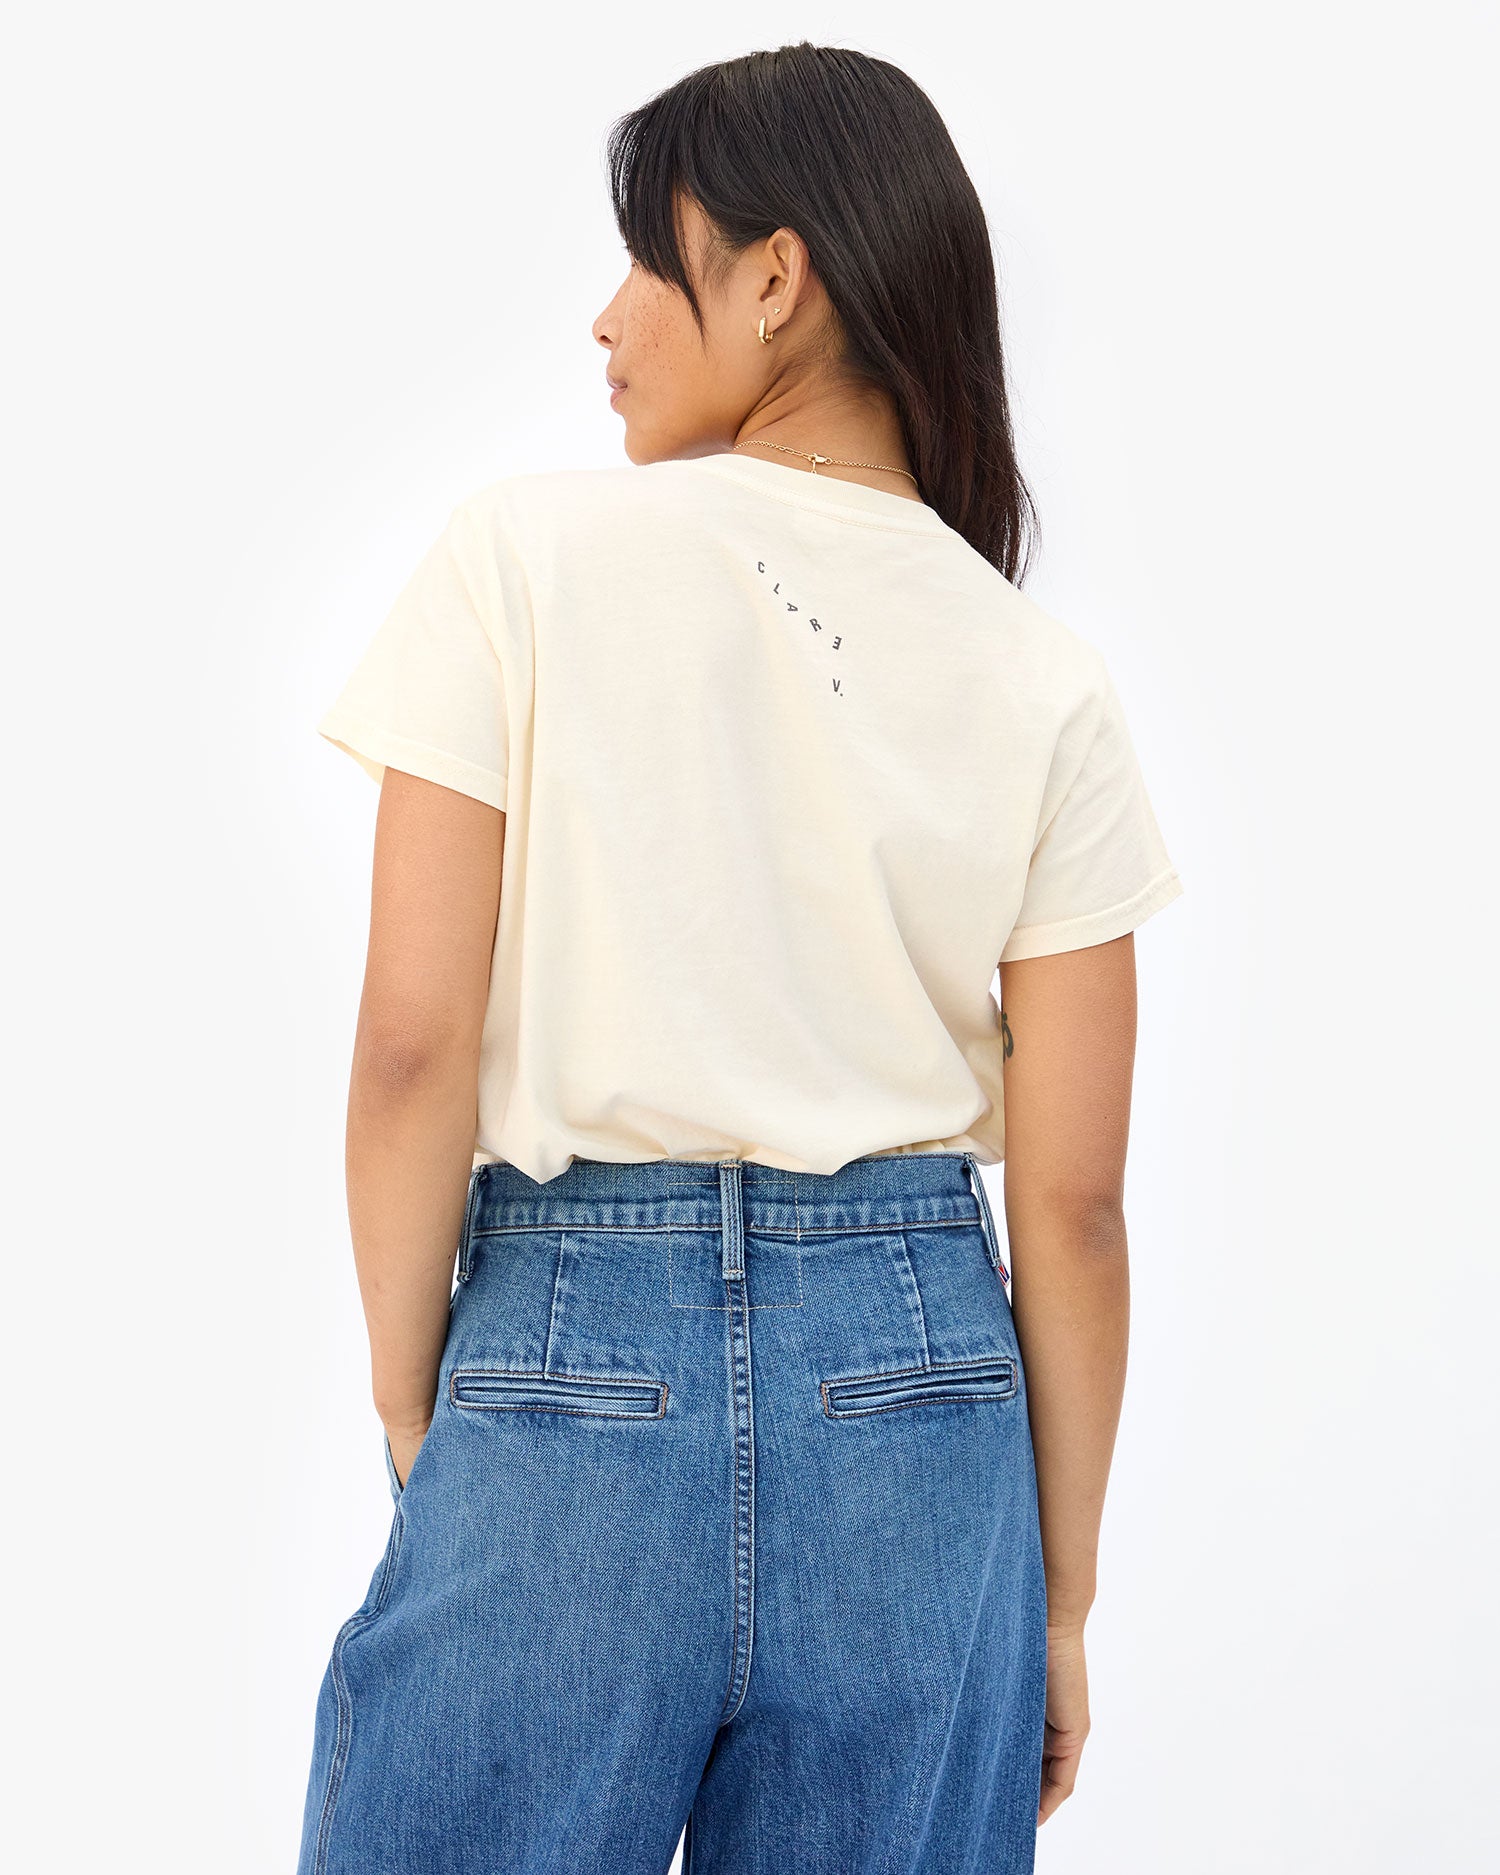 back view of Maly in the Cream Oui Classic Tee with jeans